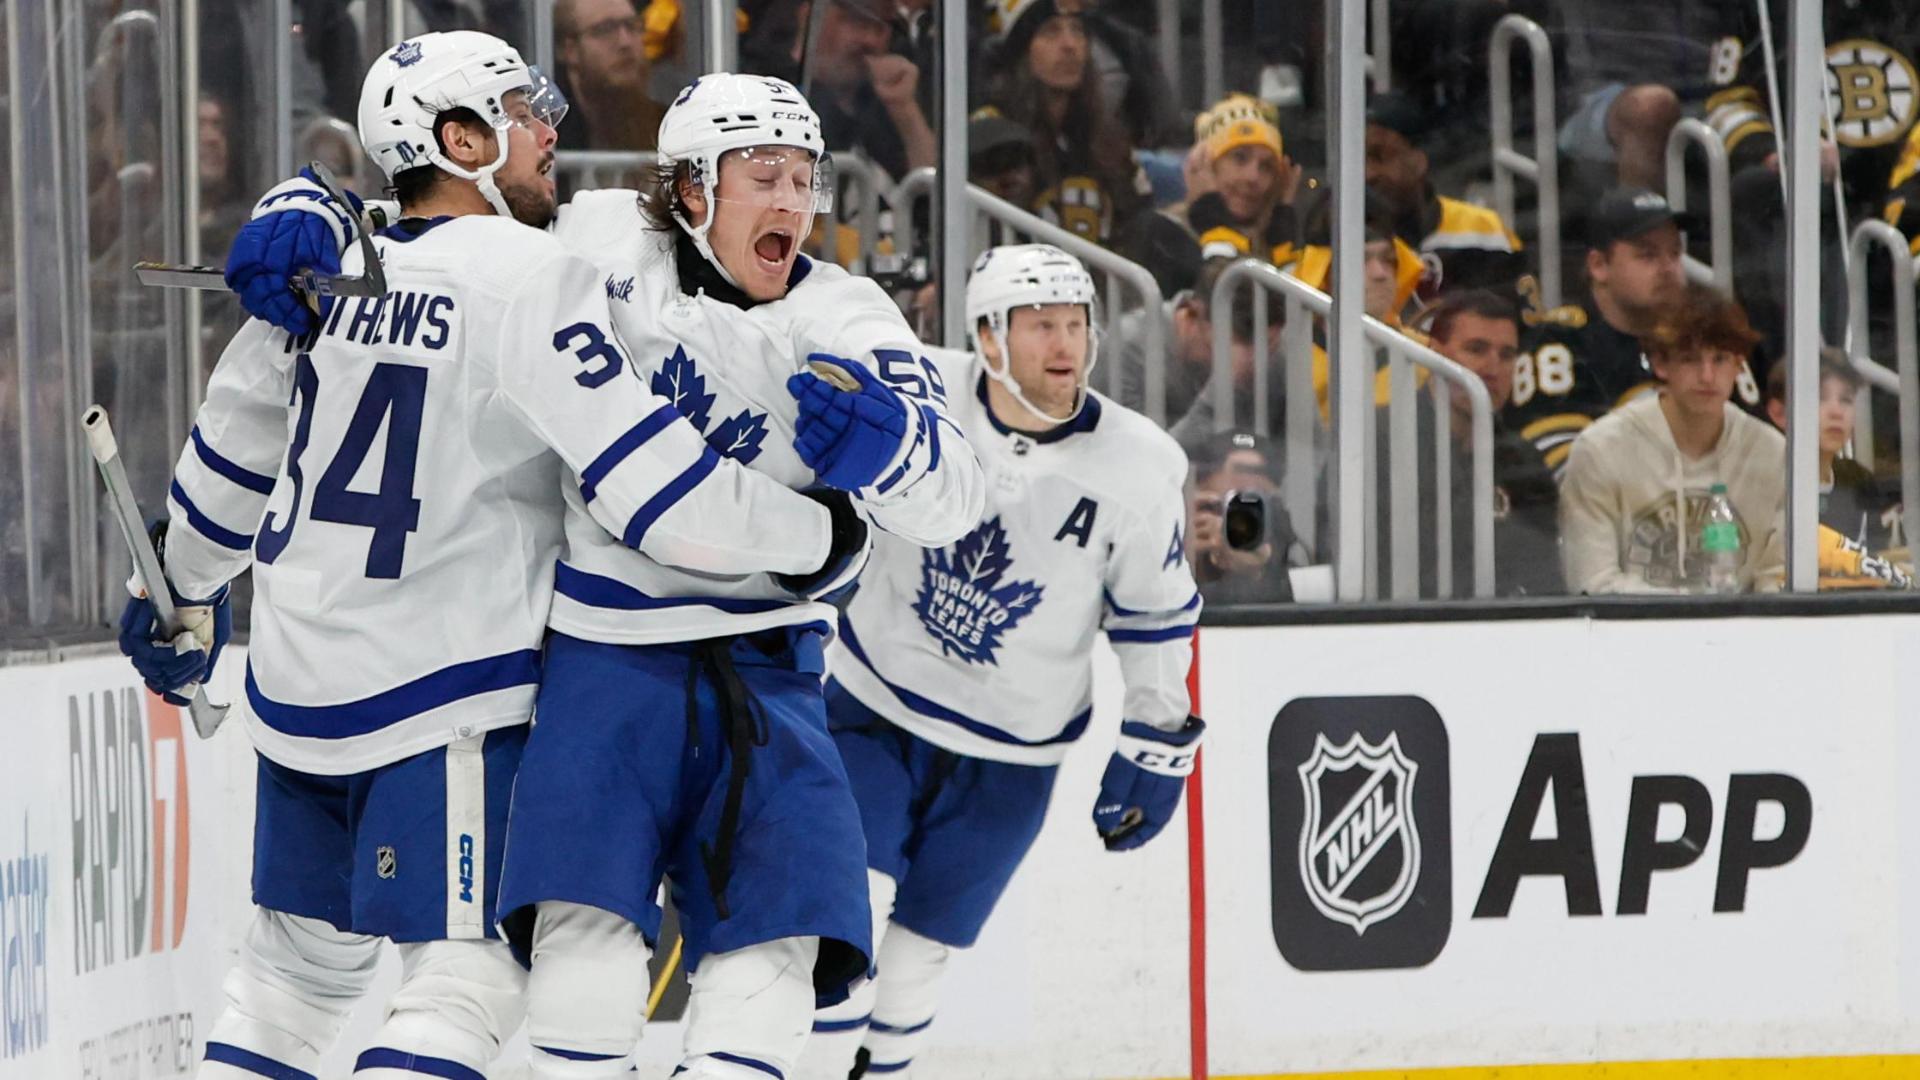 Matthews scores as Maple Leafs beat Bruins 3-2 to tie their series at 1 game apiece